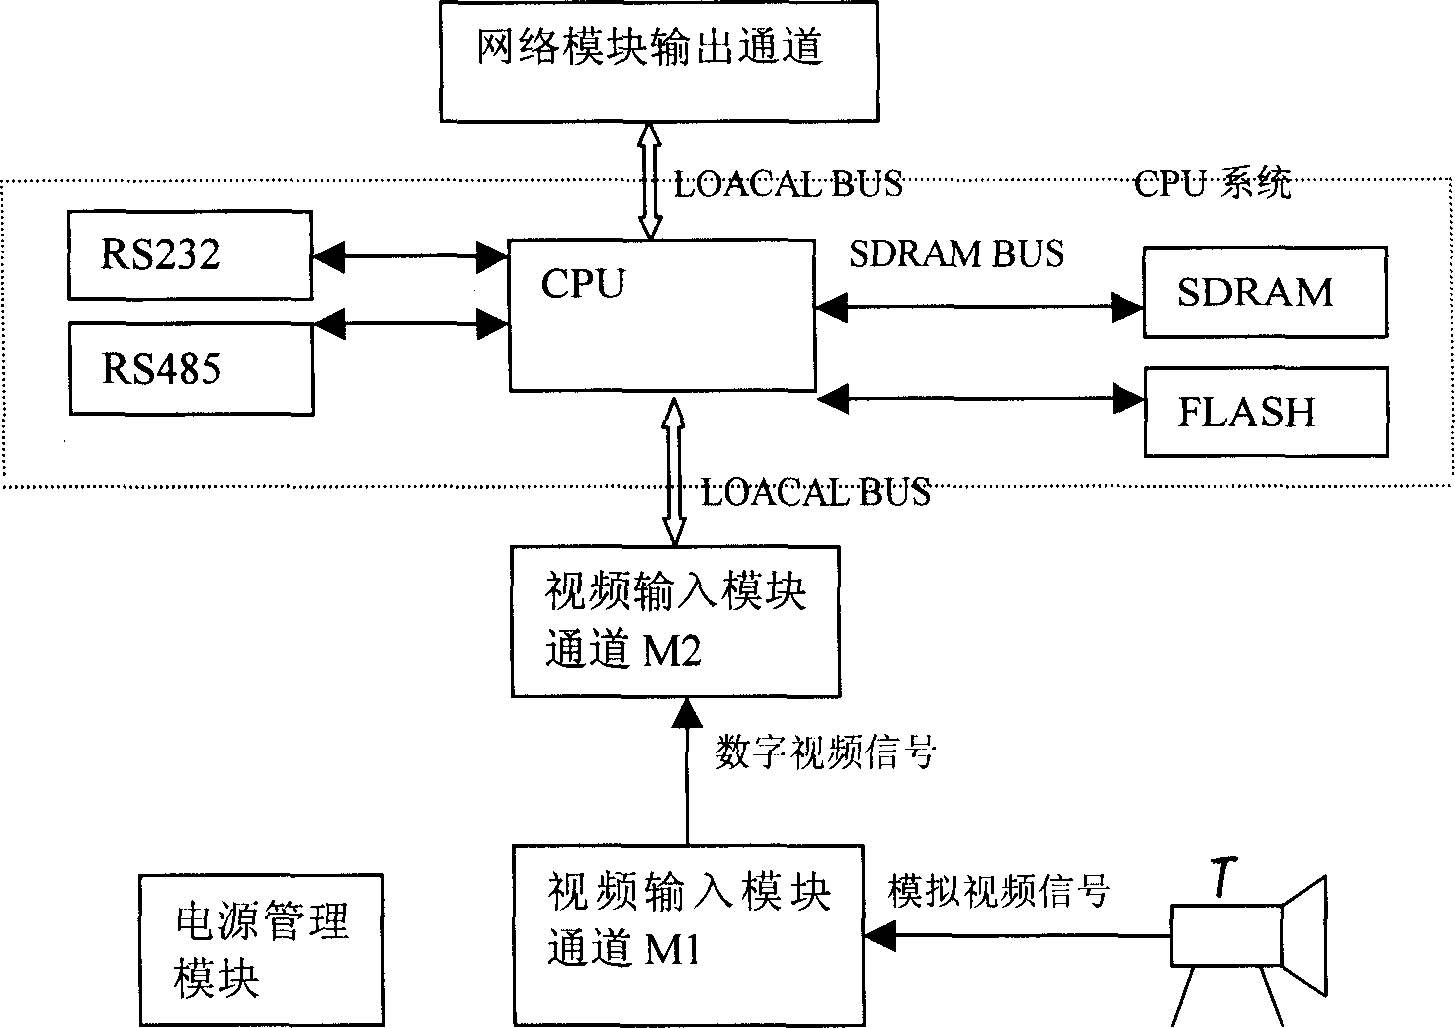 Remote information safety transmission and control system